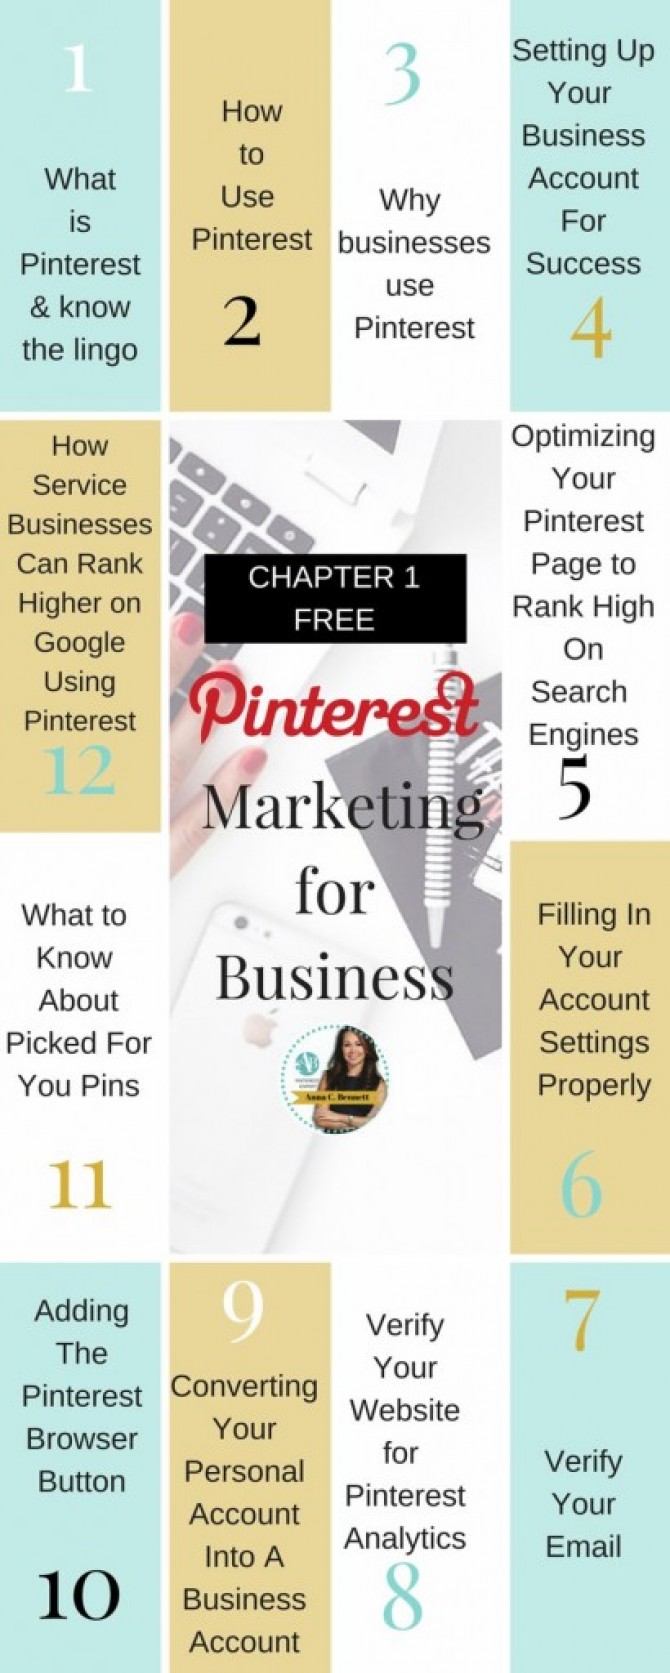 Pinterest marketing for newbies: If you don’t know where to start or want to learn how to set-up and operate your Pinterest account correctly for maximum success as quickly as possible you can receive Chapter 1 of my Pinterest Marketing for Business course for FREE to help you get started